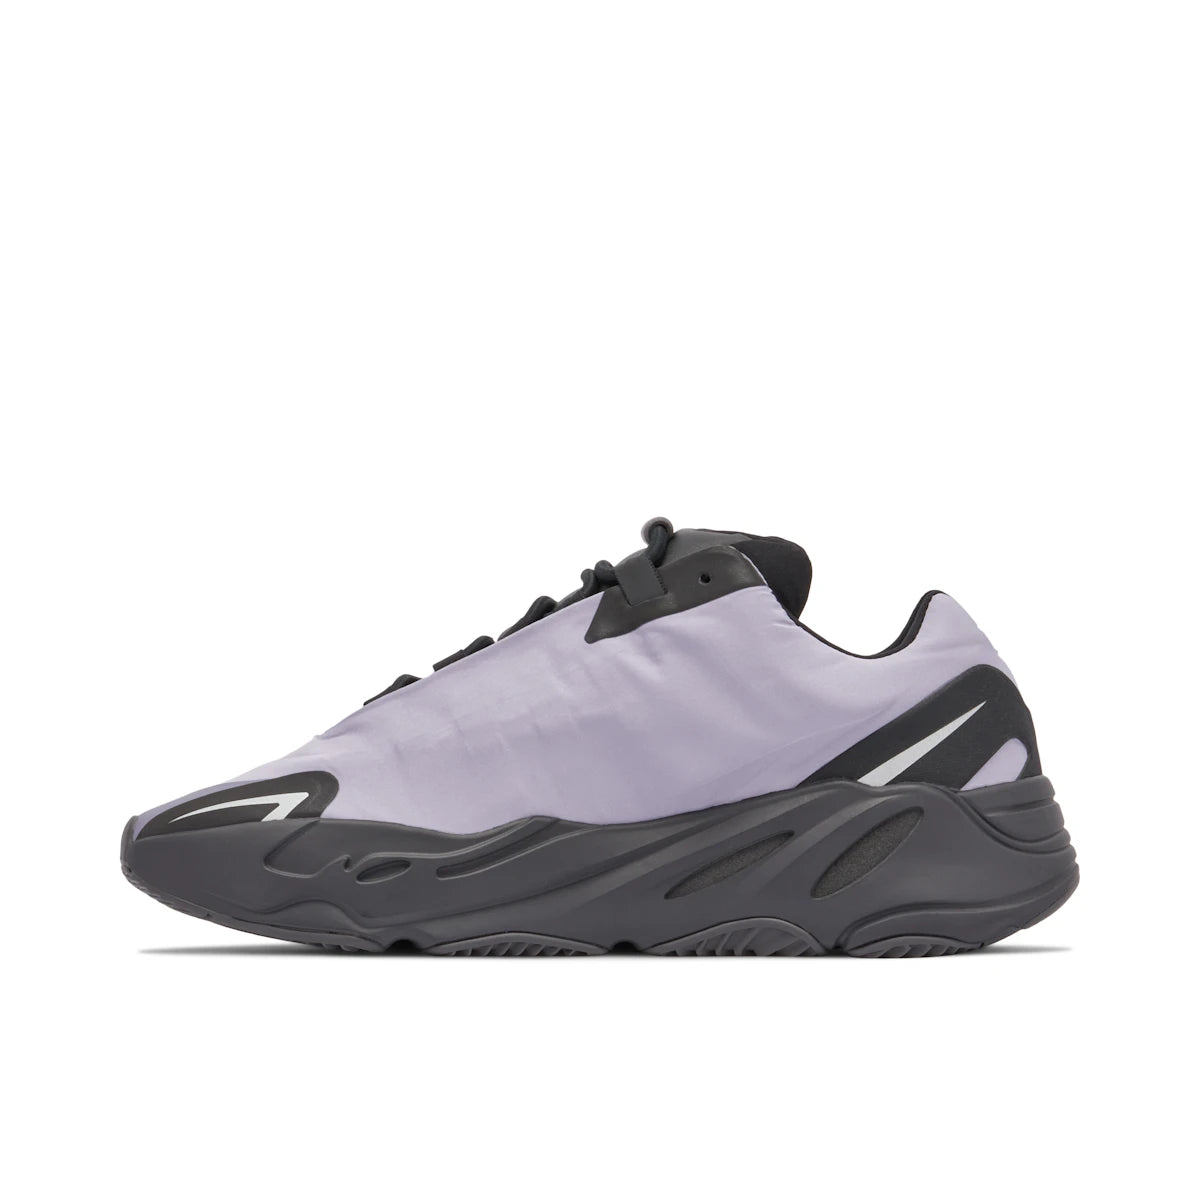 YEEZY BOOST 700 MNVN GEODE by Yeezy from £250.00